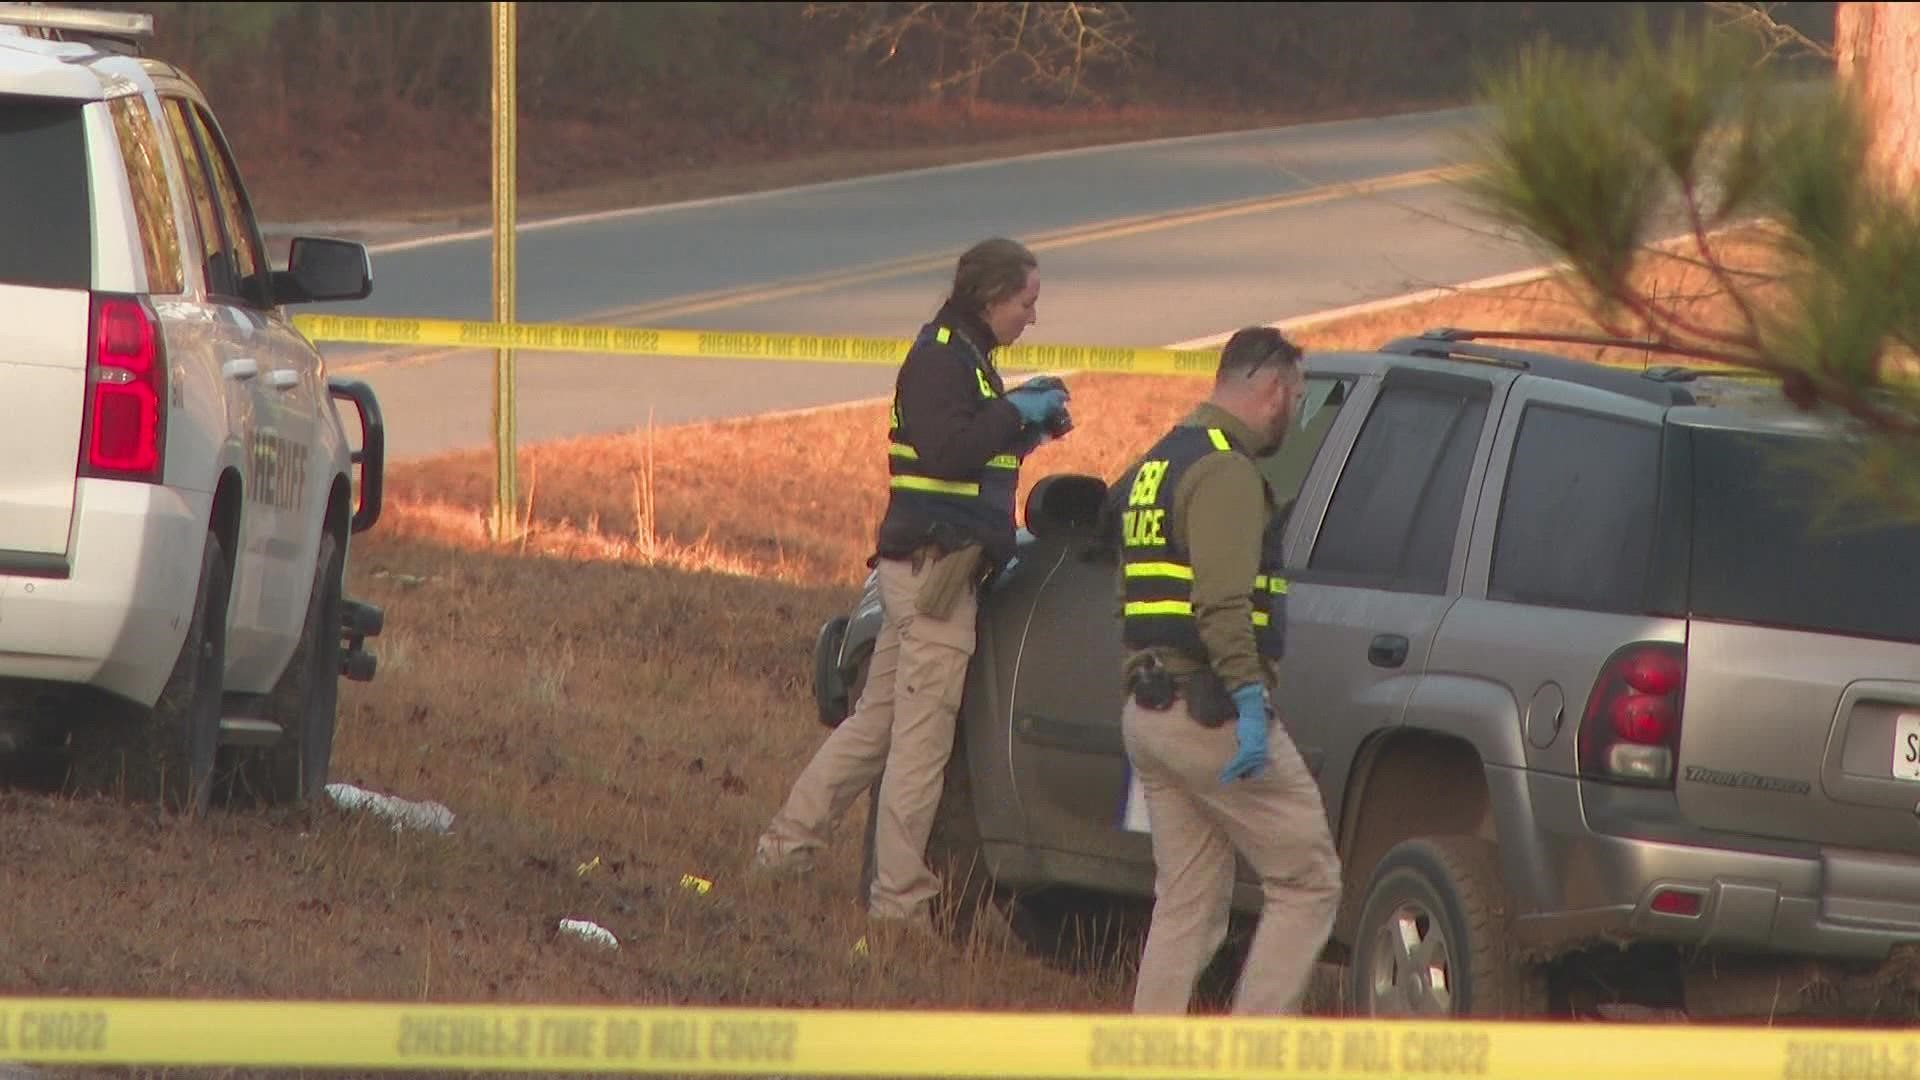 The Georgia Bureau of Investigation is looking into a shooting involving an officer in Coweta County.